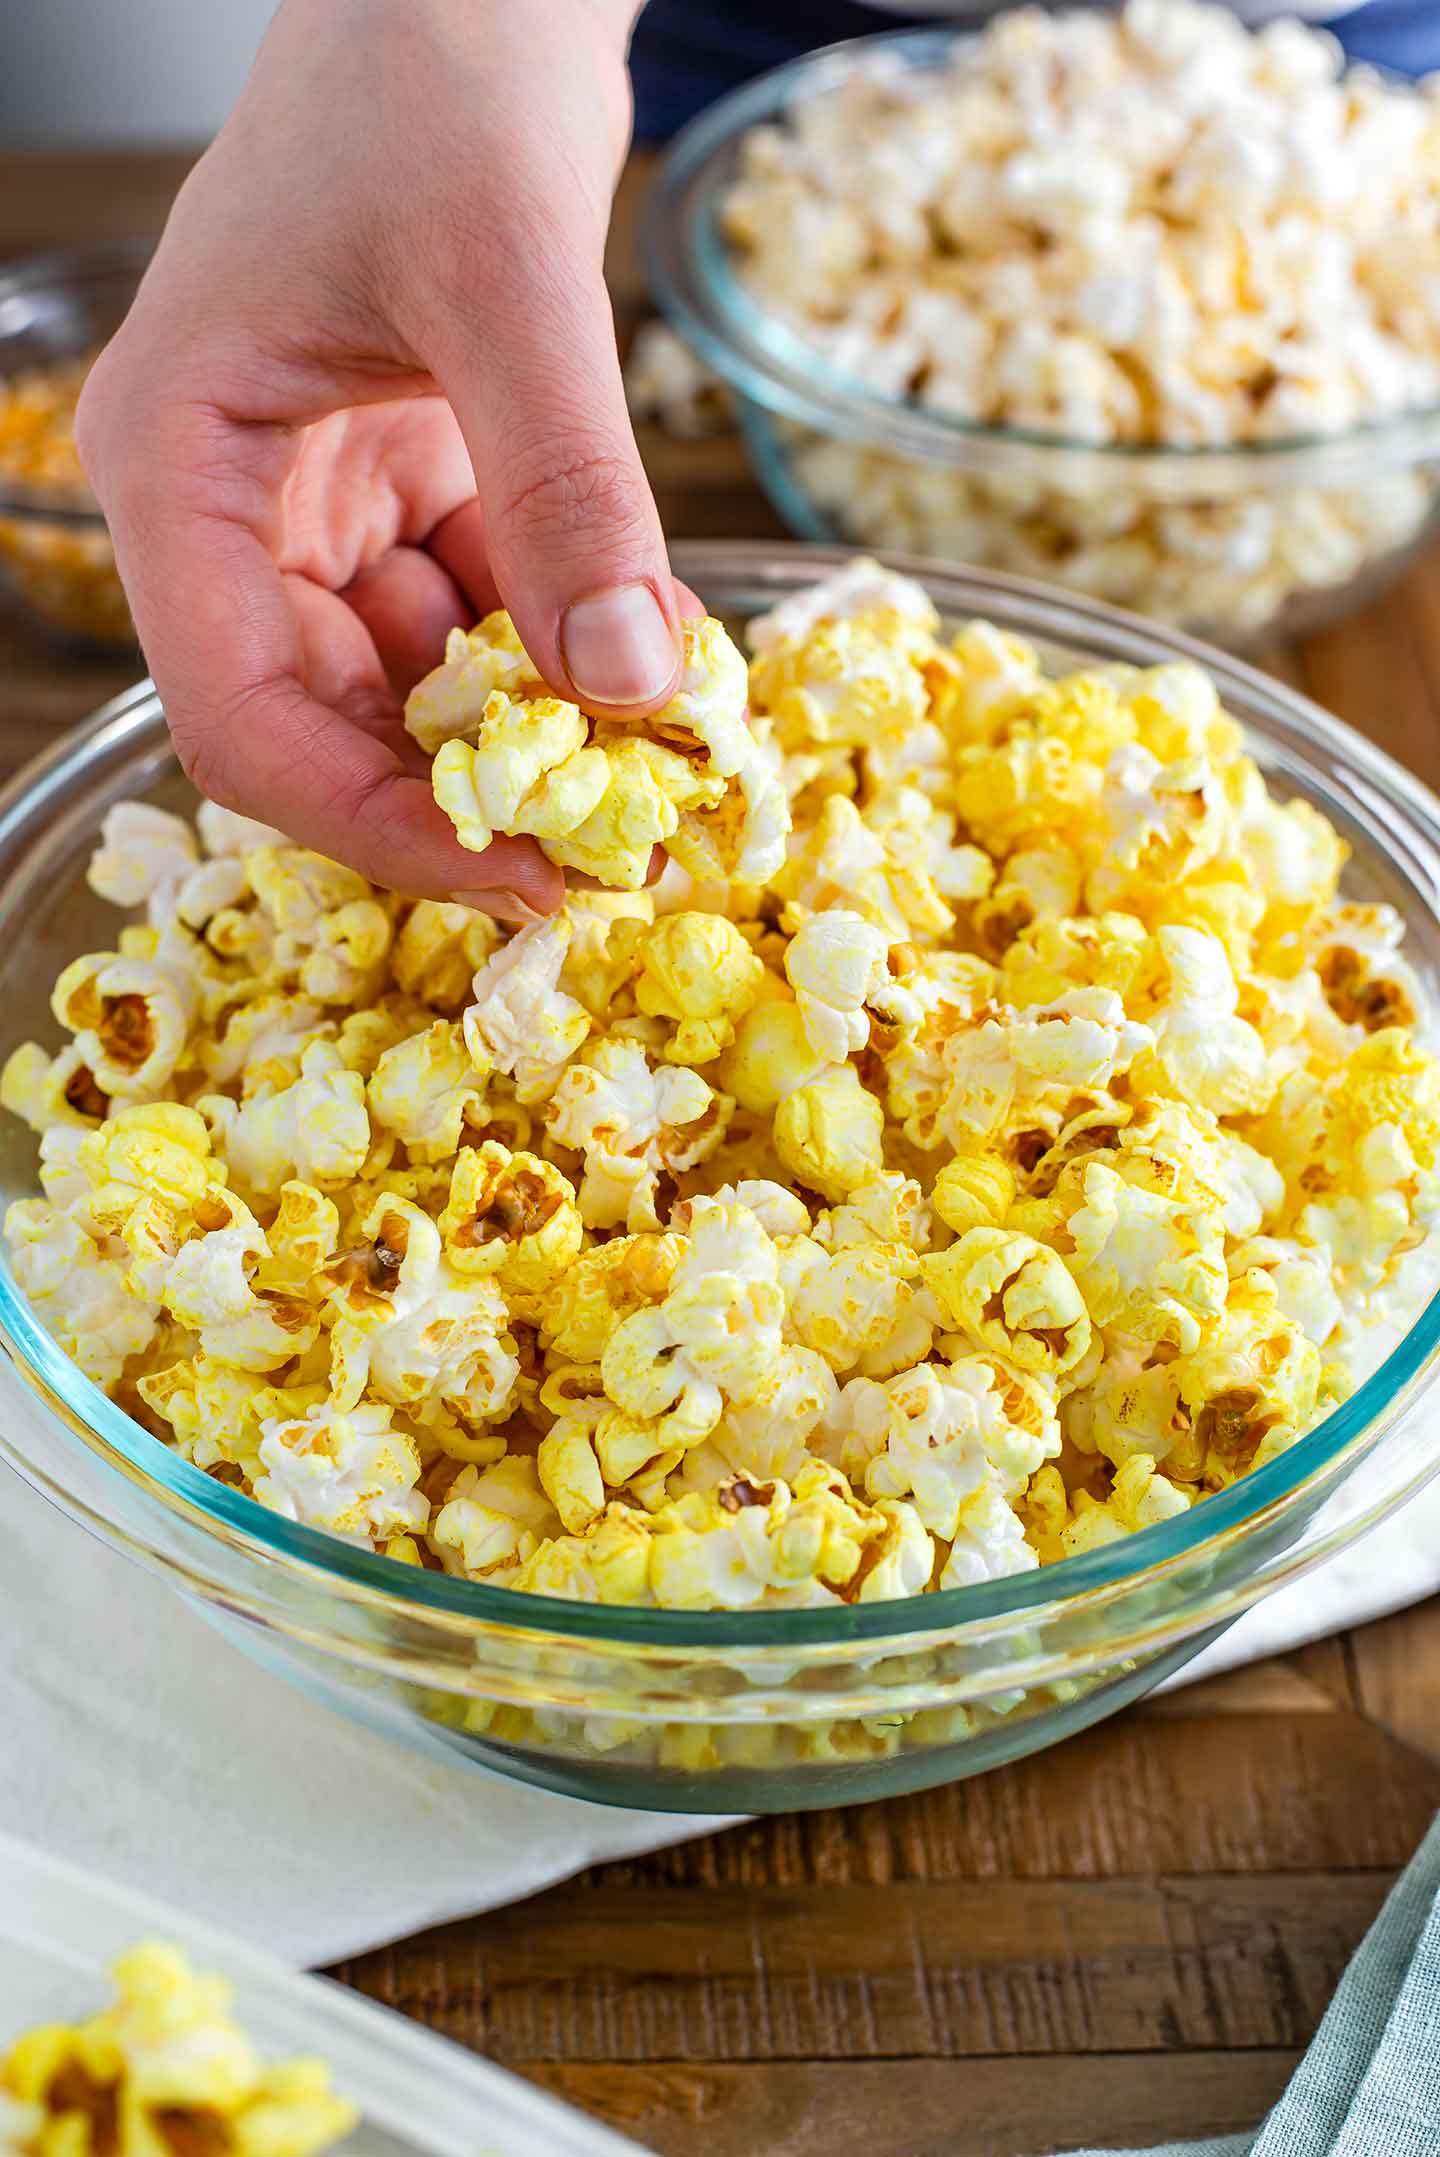 Side view of a hand grabbing popcorn from a large bowl.